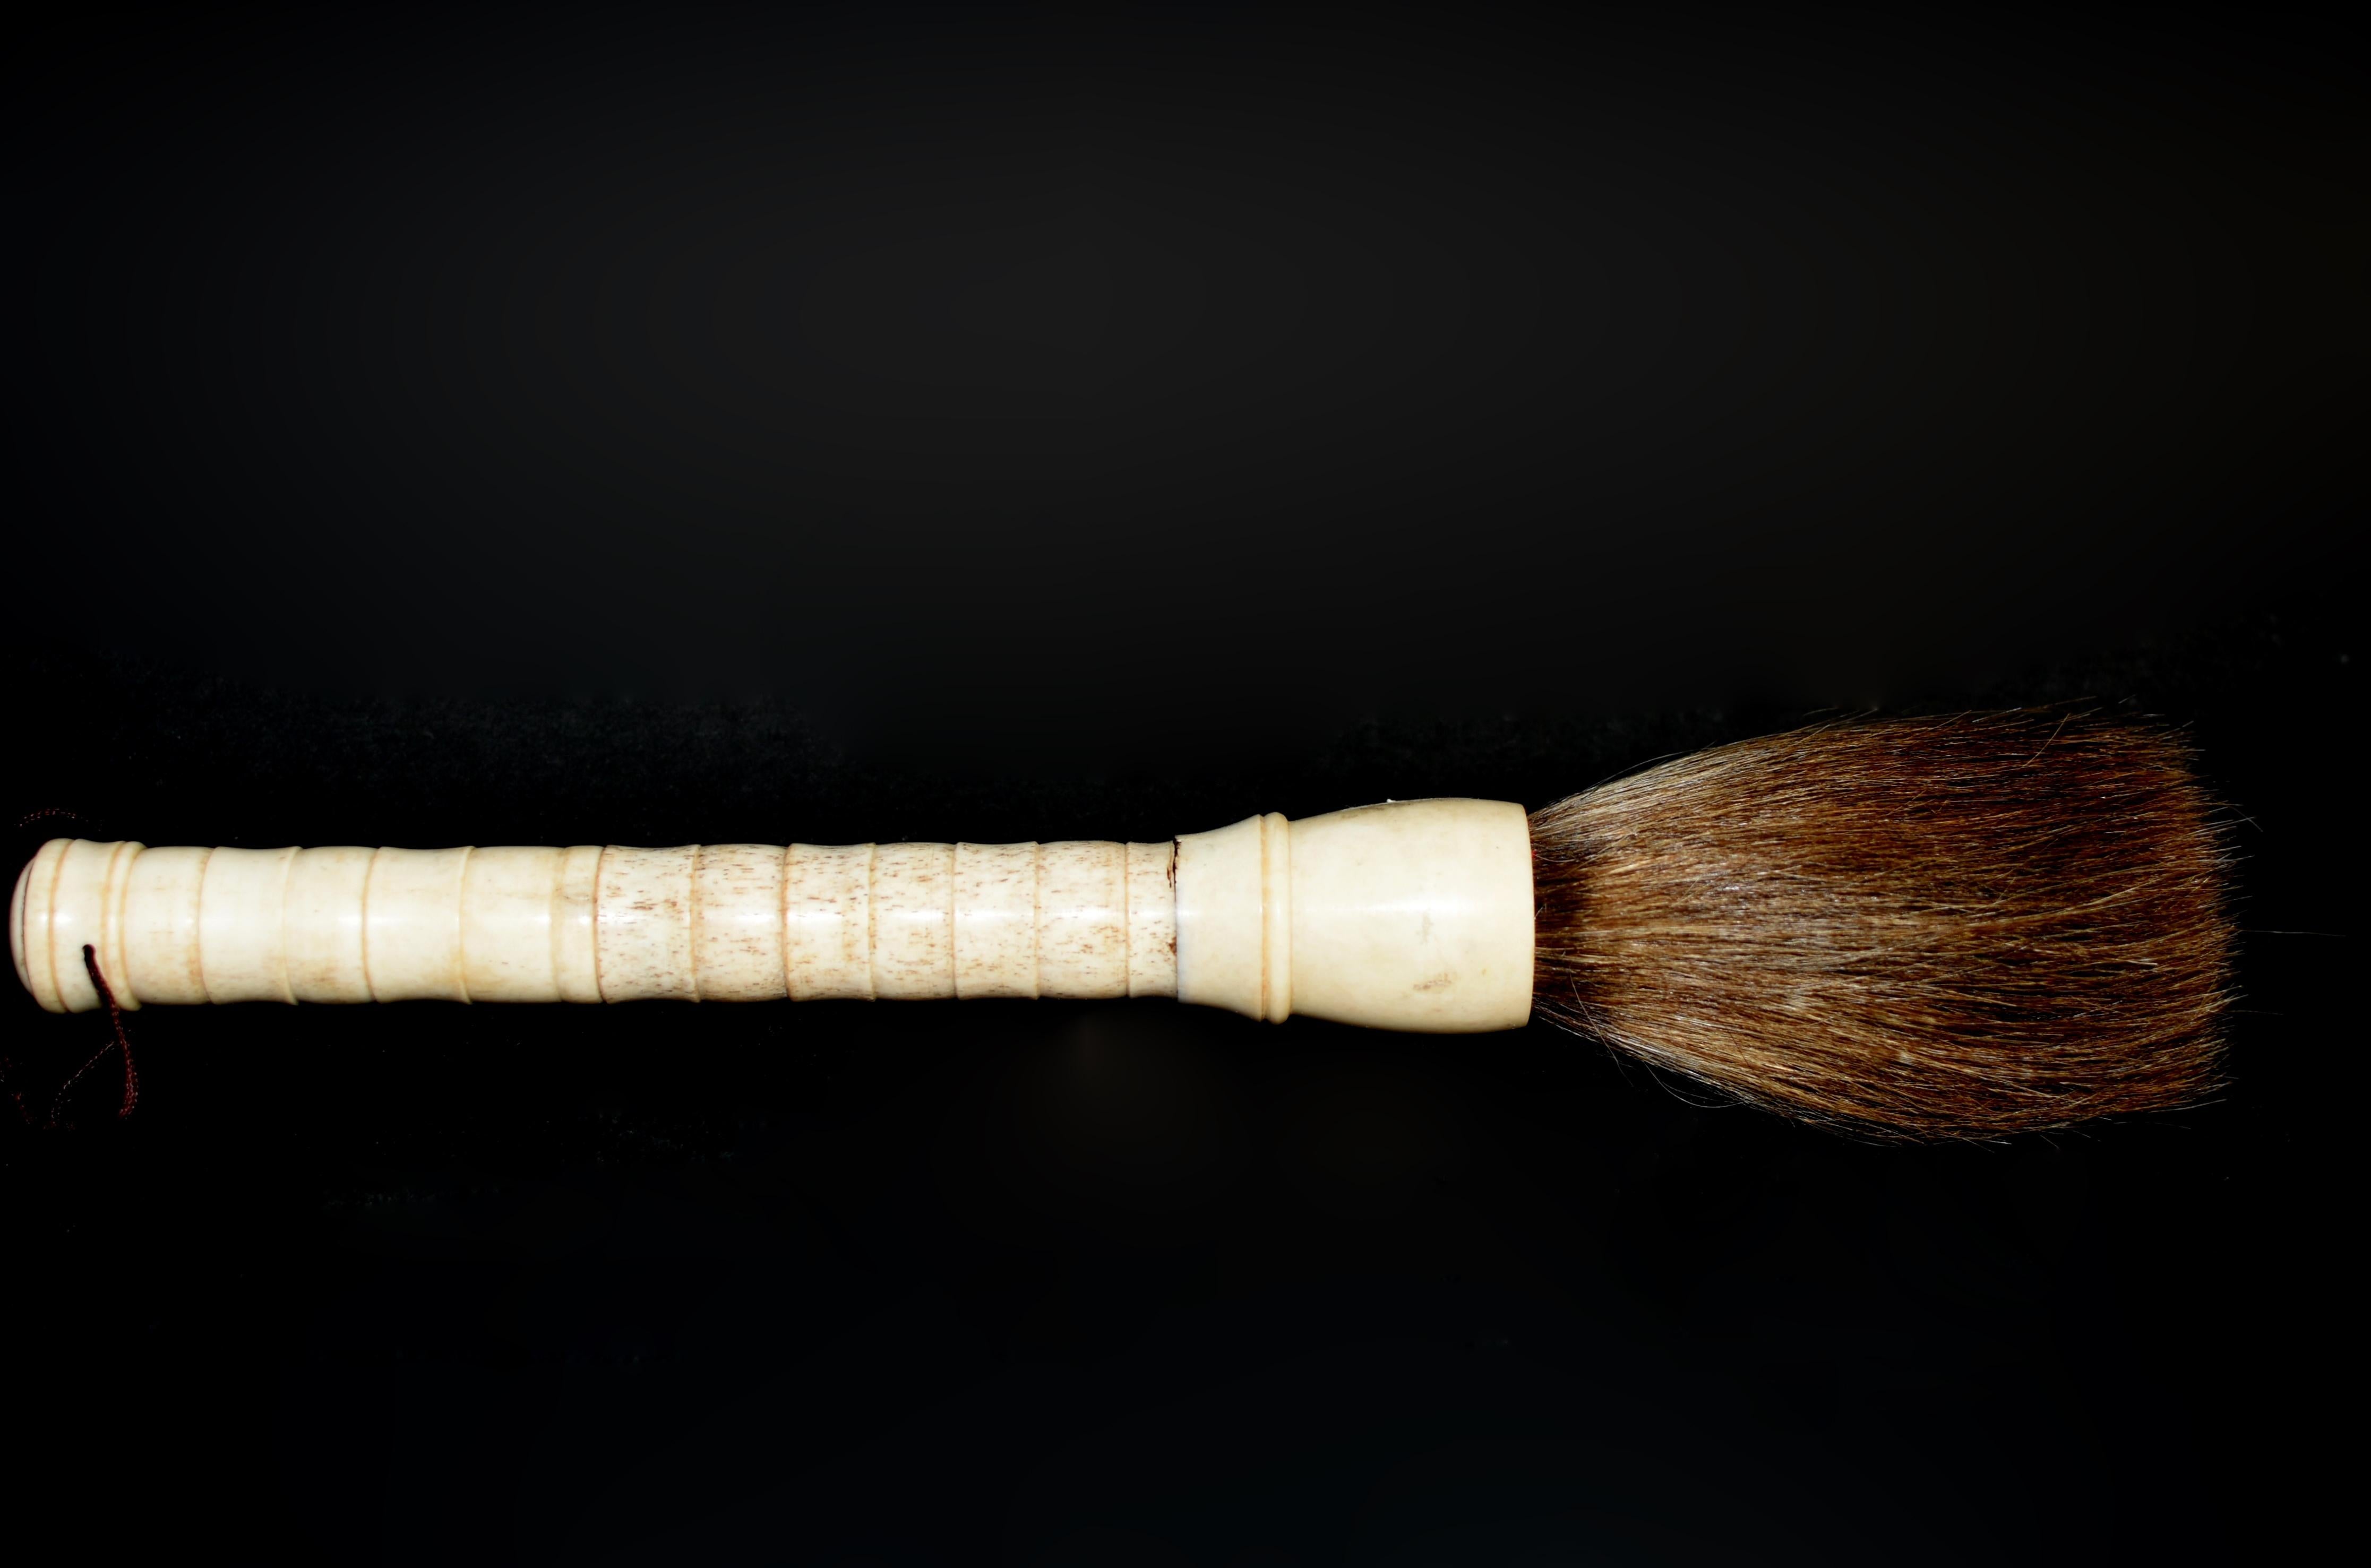 A beautiful Chinese calligraphy brush with handmade bone handle. This brush is from the 20th century but was not used. It is perfect for making art, calligraphy or as an design element. Bone ferrule and horse hair.